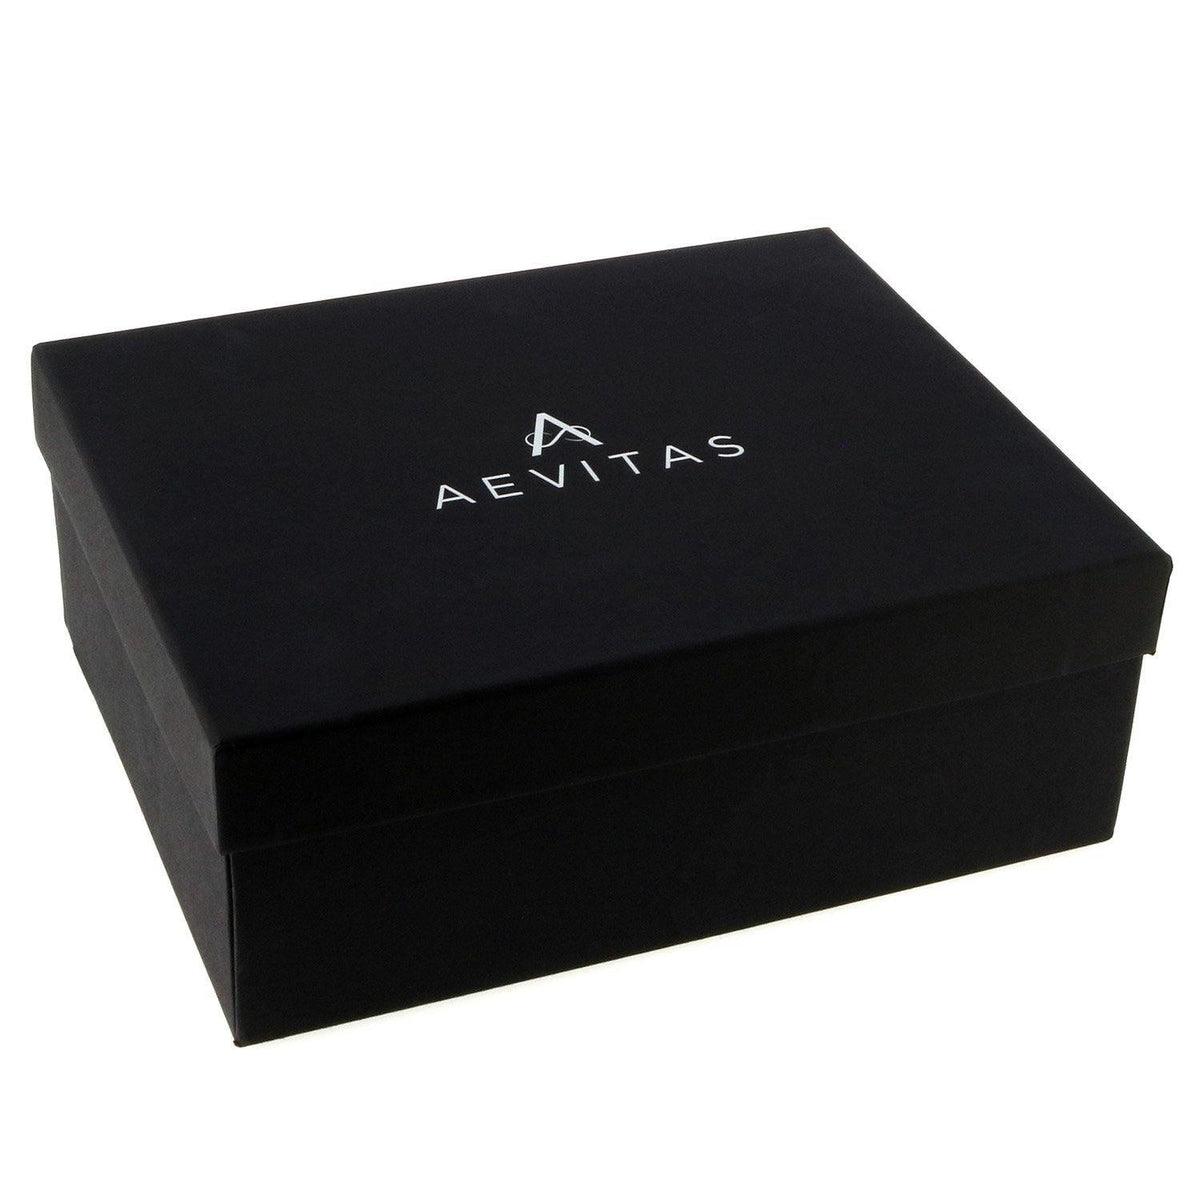 Premium Quality Dark Burl Wood Finish Watch Collectors Box for 12 Watches by Aevitas